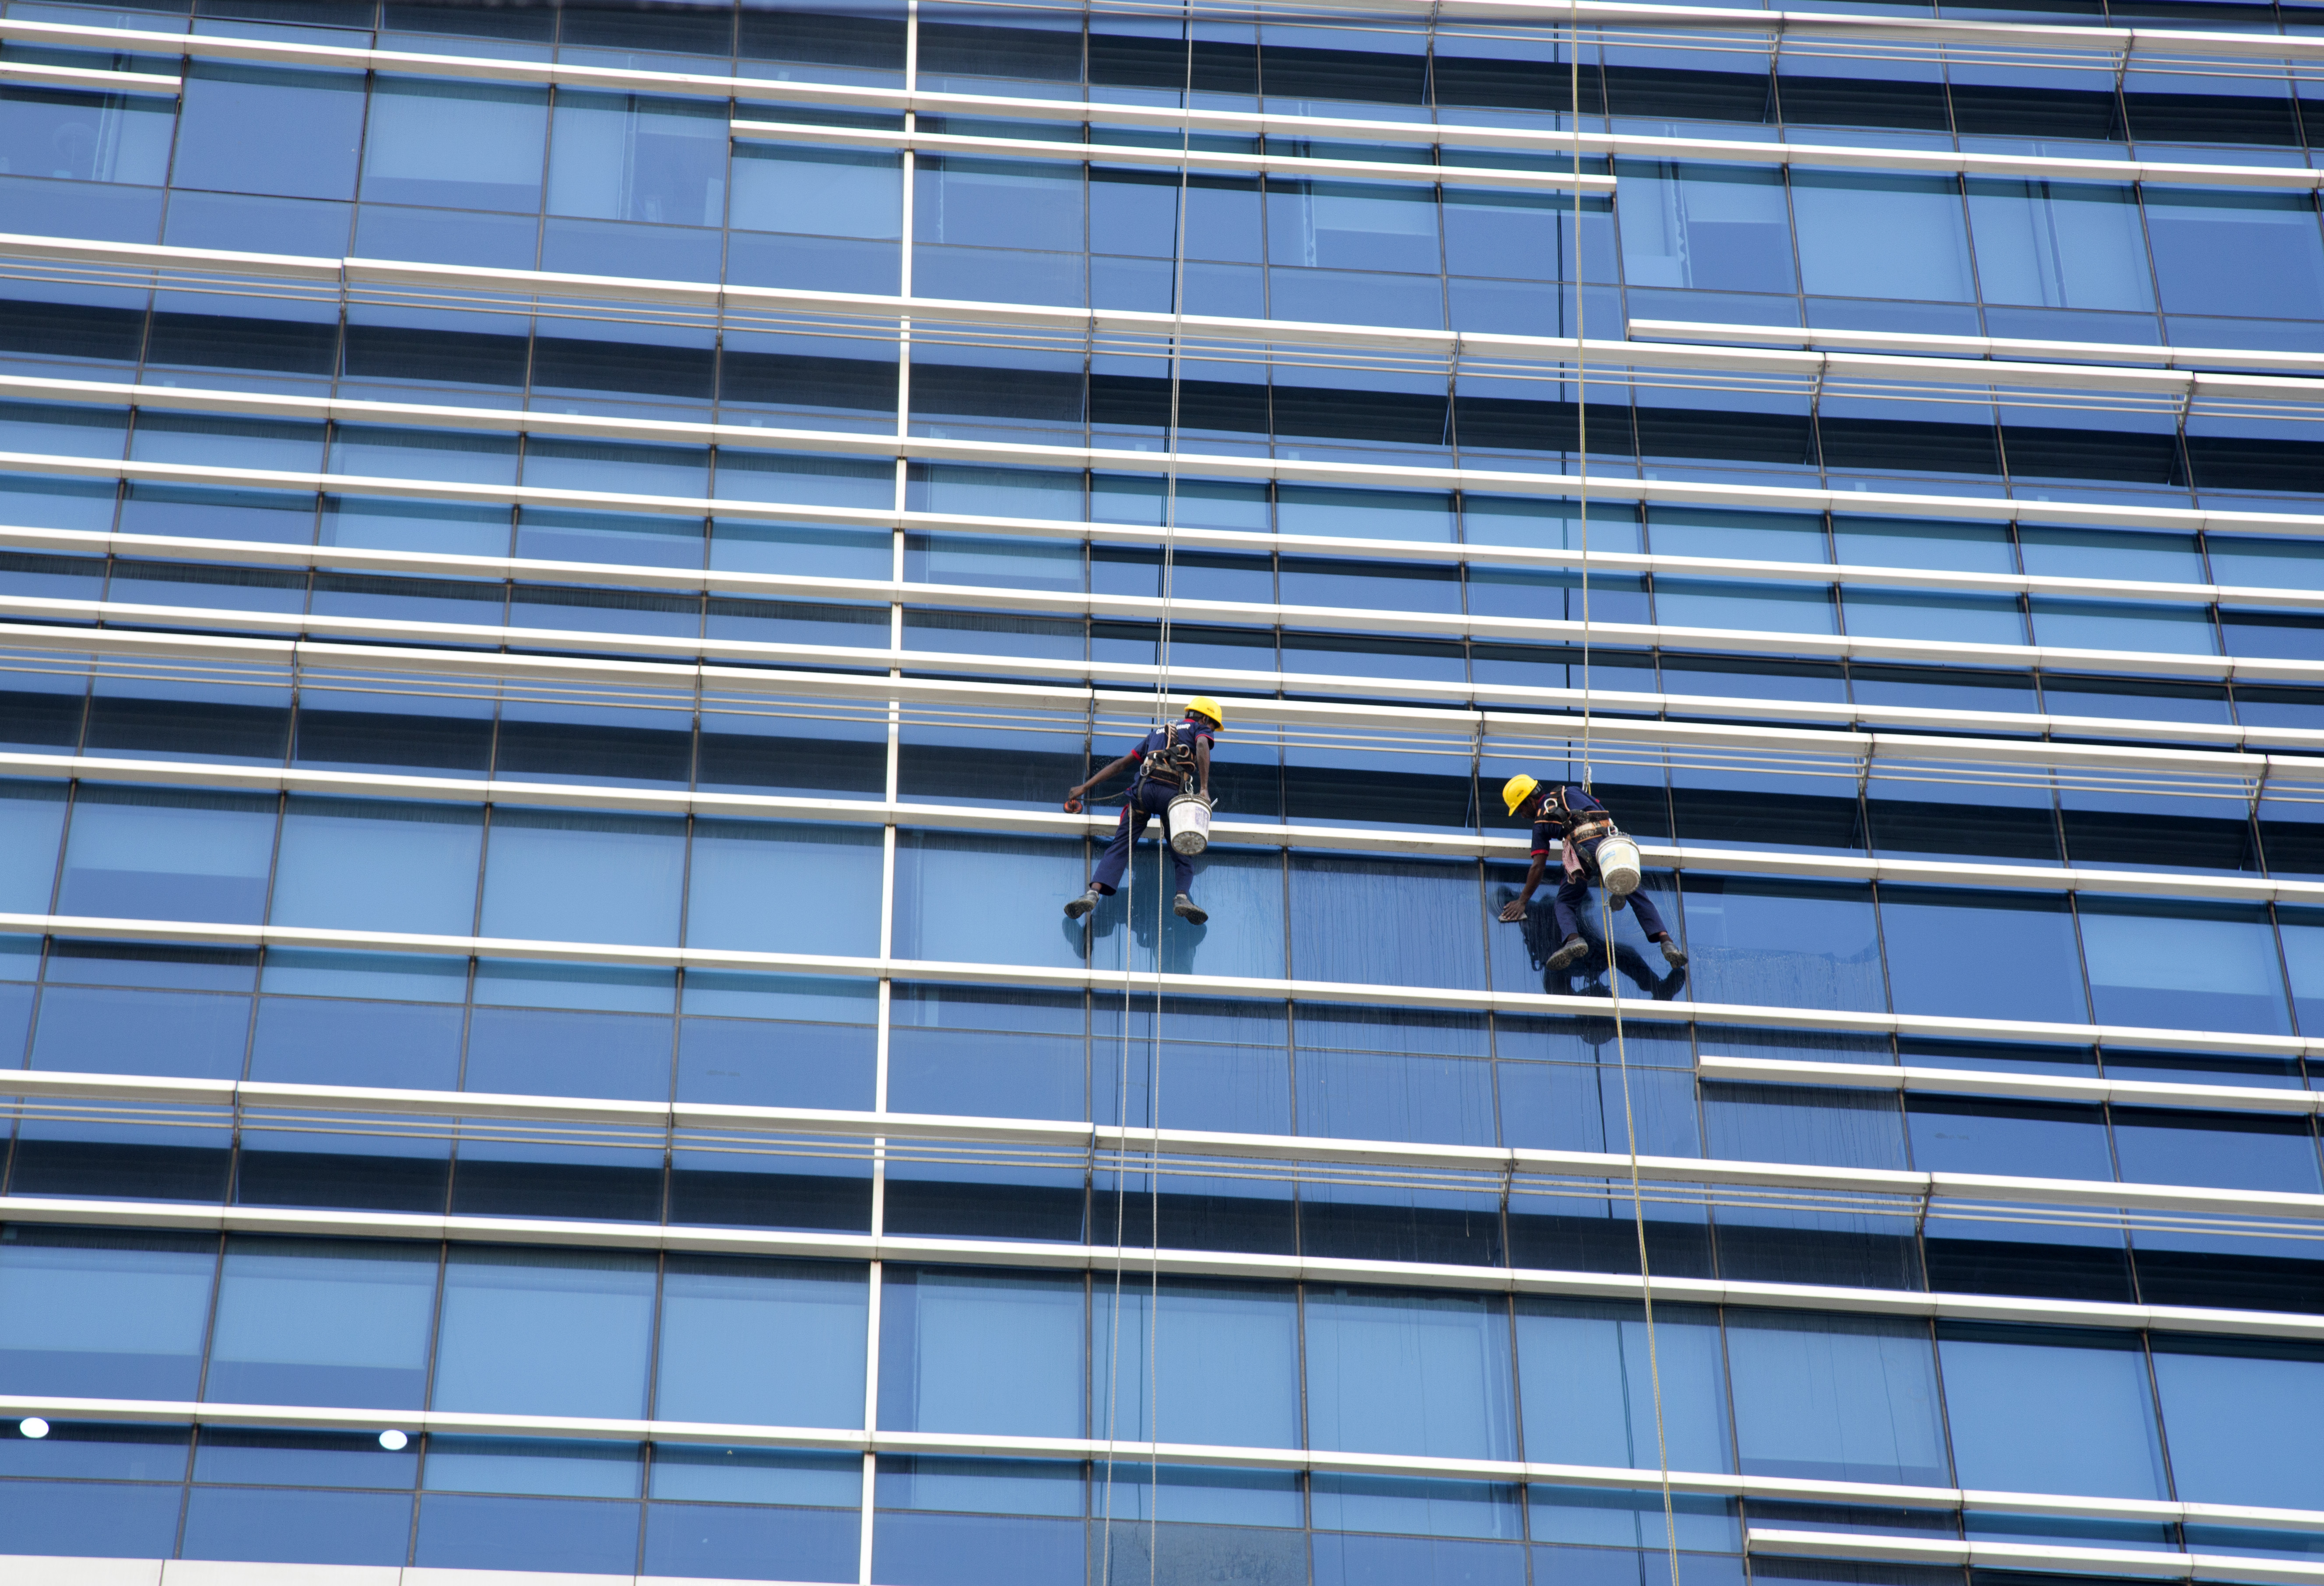 Window cleaners work on glass panes of a building in Hyderabad, India - AP